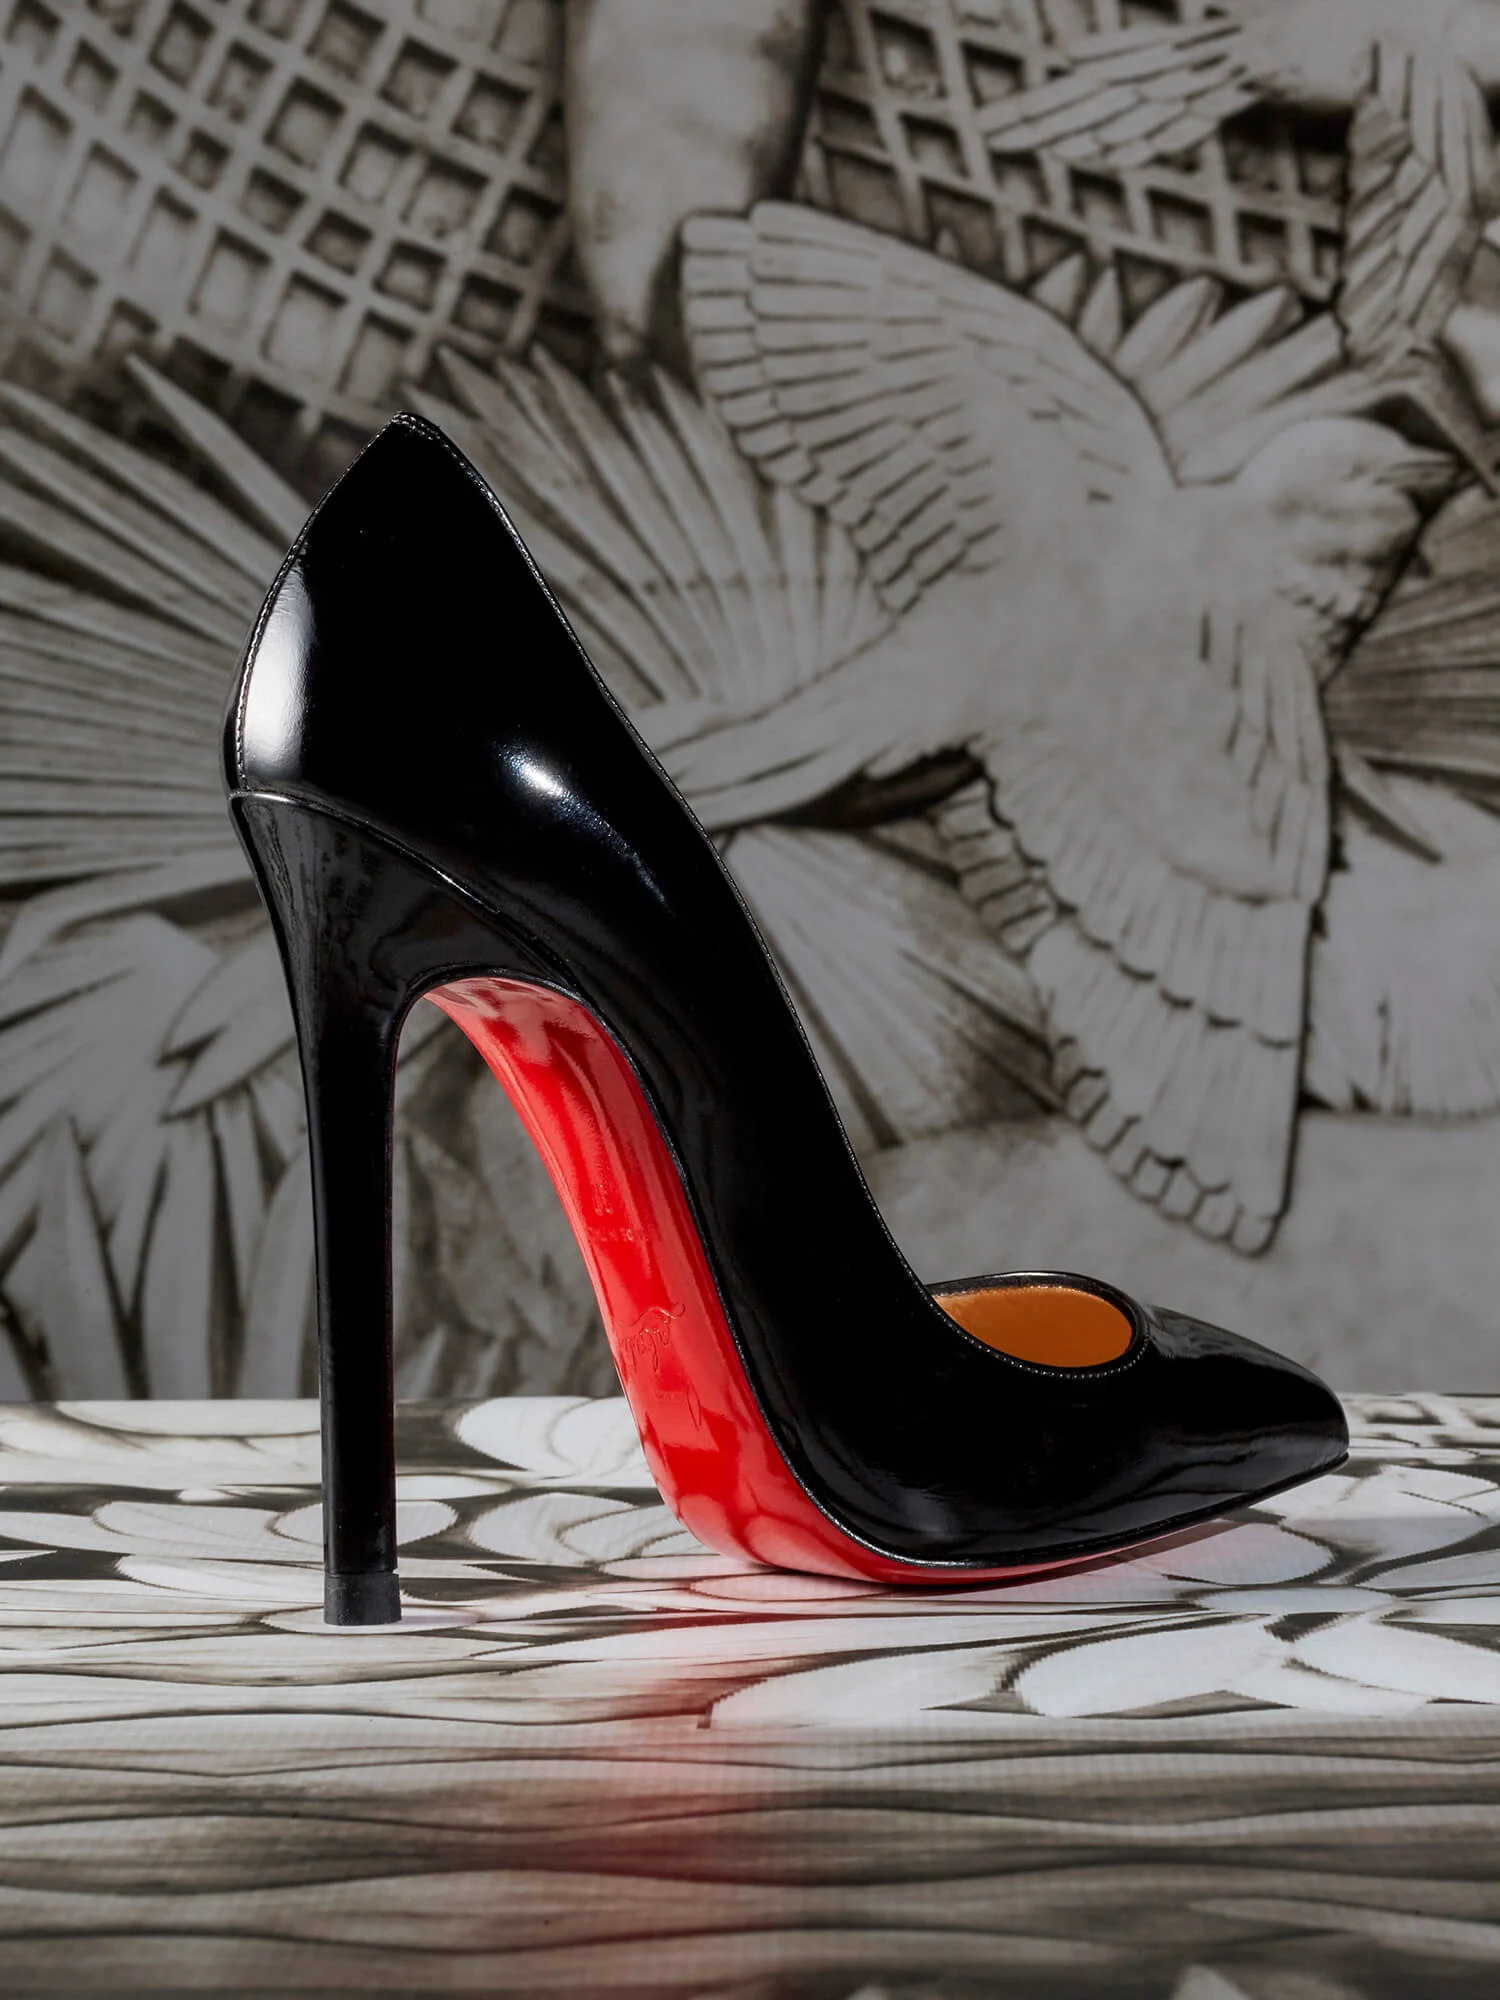 YSL to Louboutin: we did it first